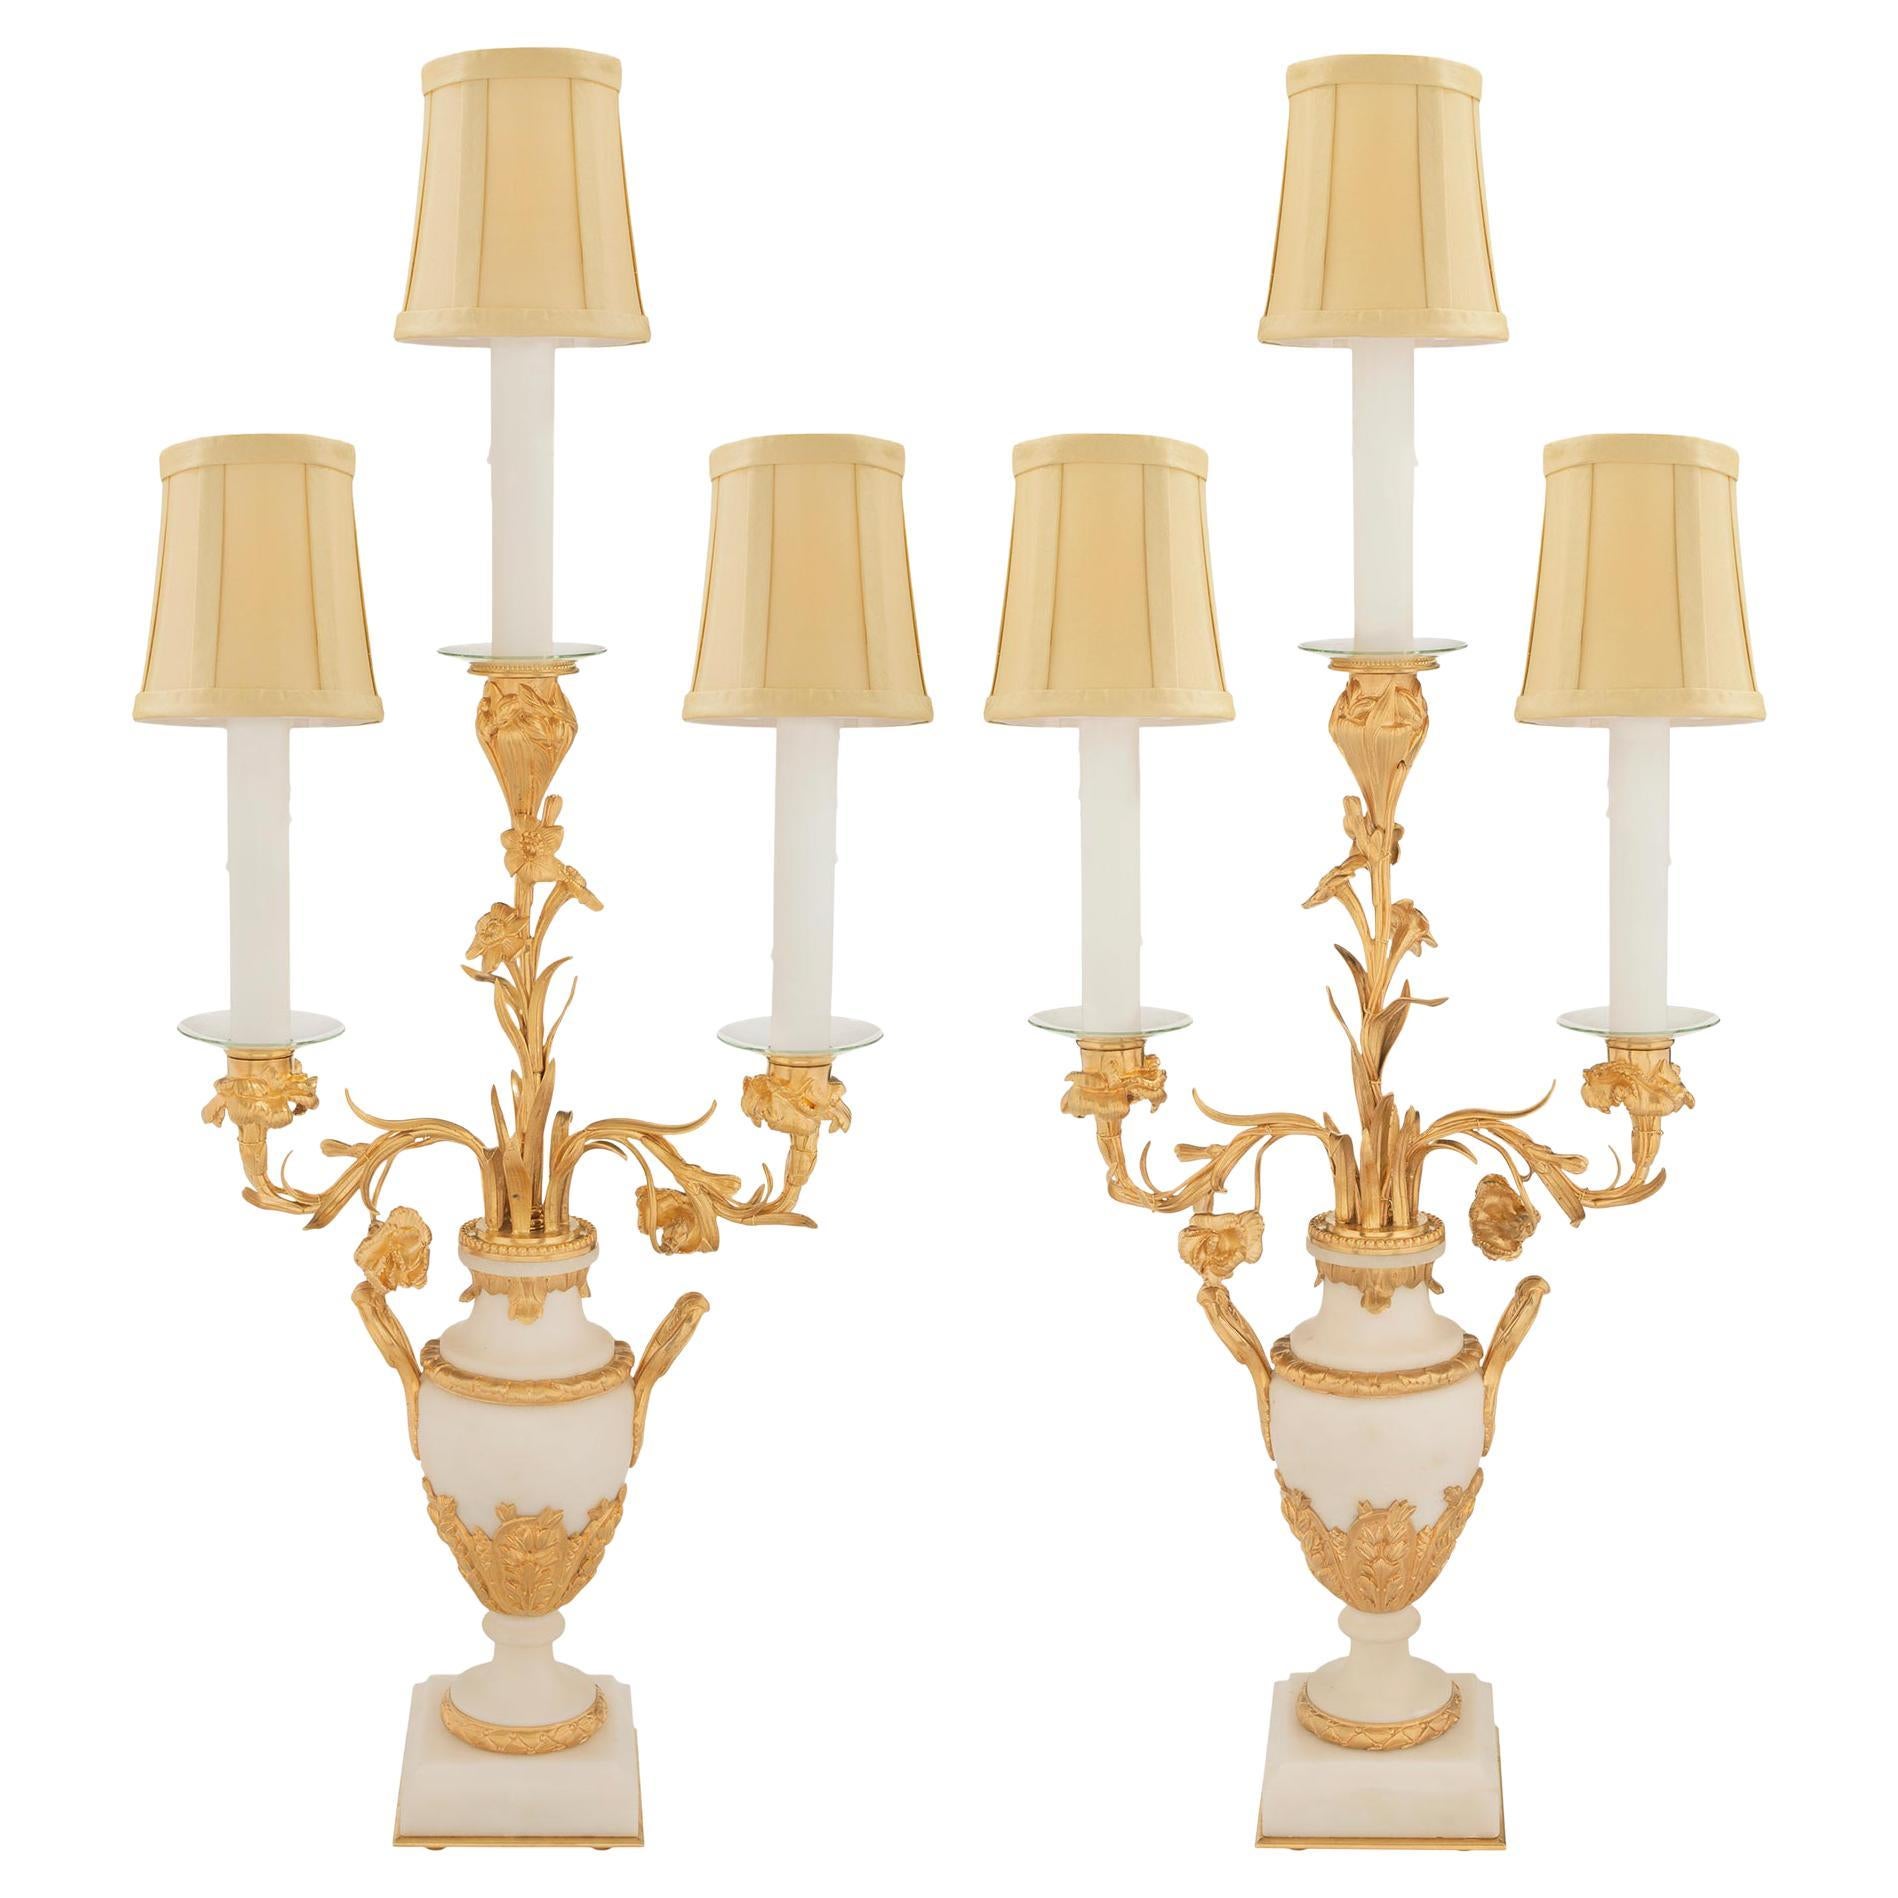 Pair of French 19th Century Louis XVI Style Ormolu and Carrara Marble Lamps For Sale